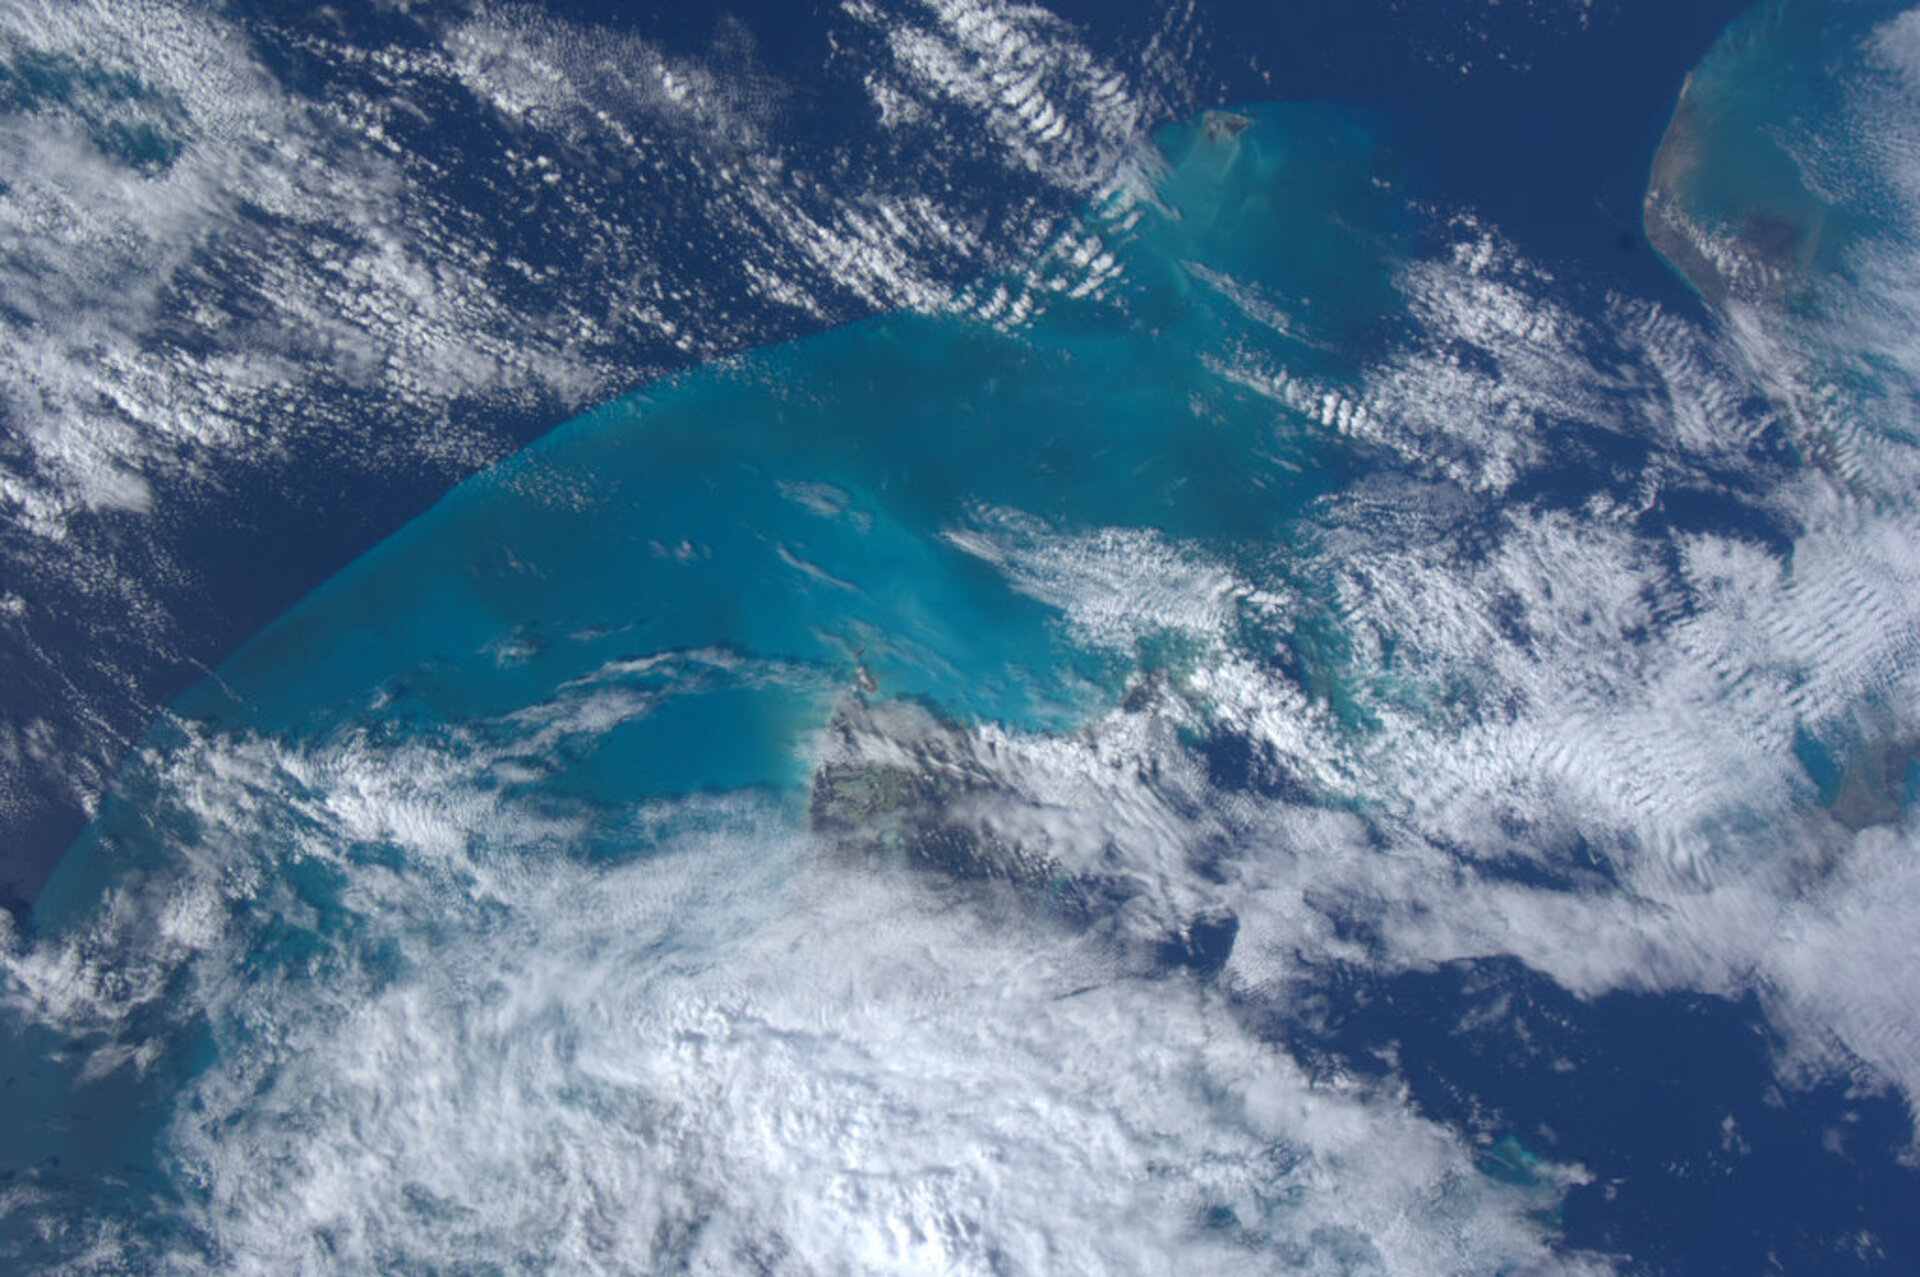 Turquoise waters in the Bahamas, as seen from the ISS